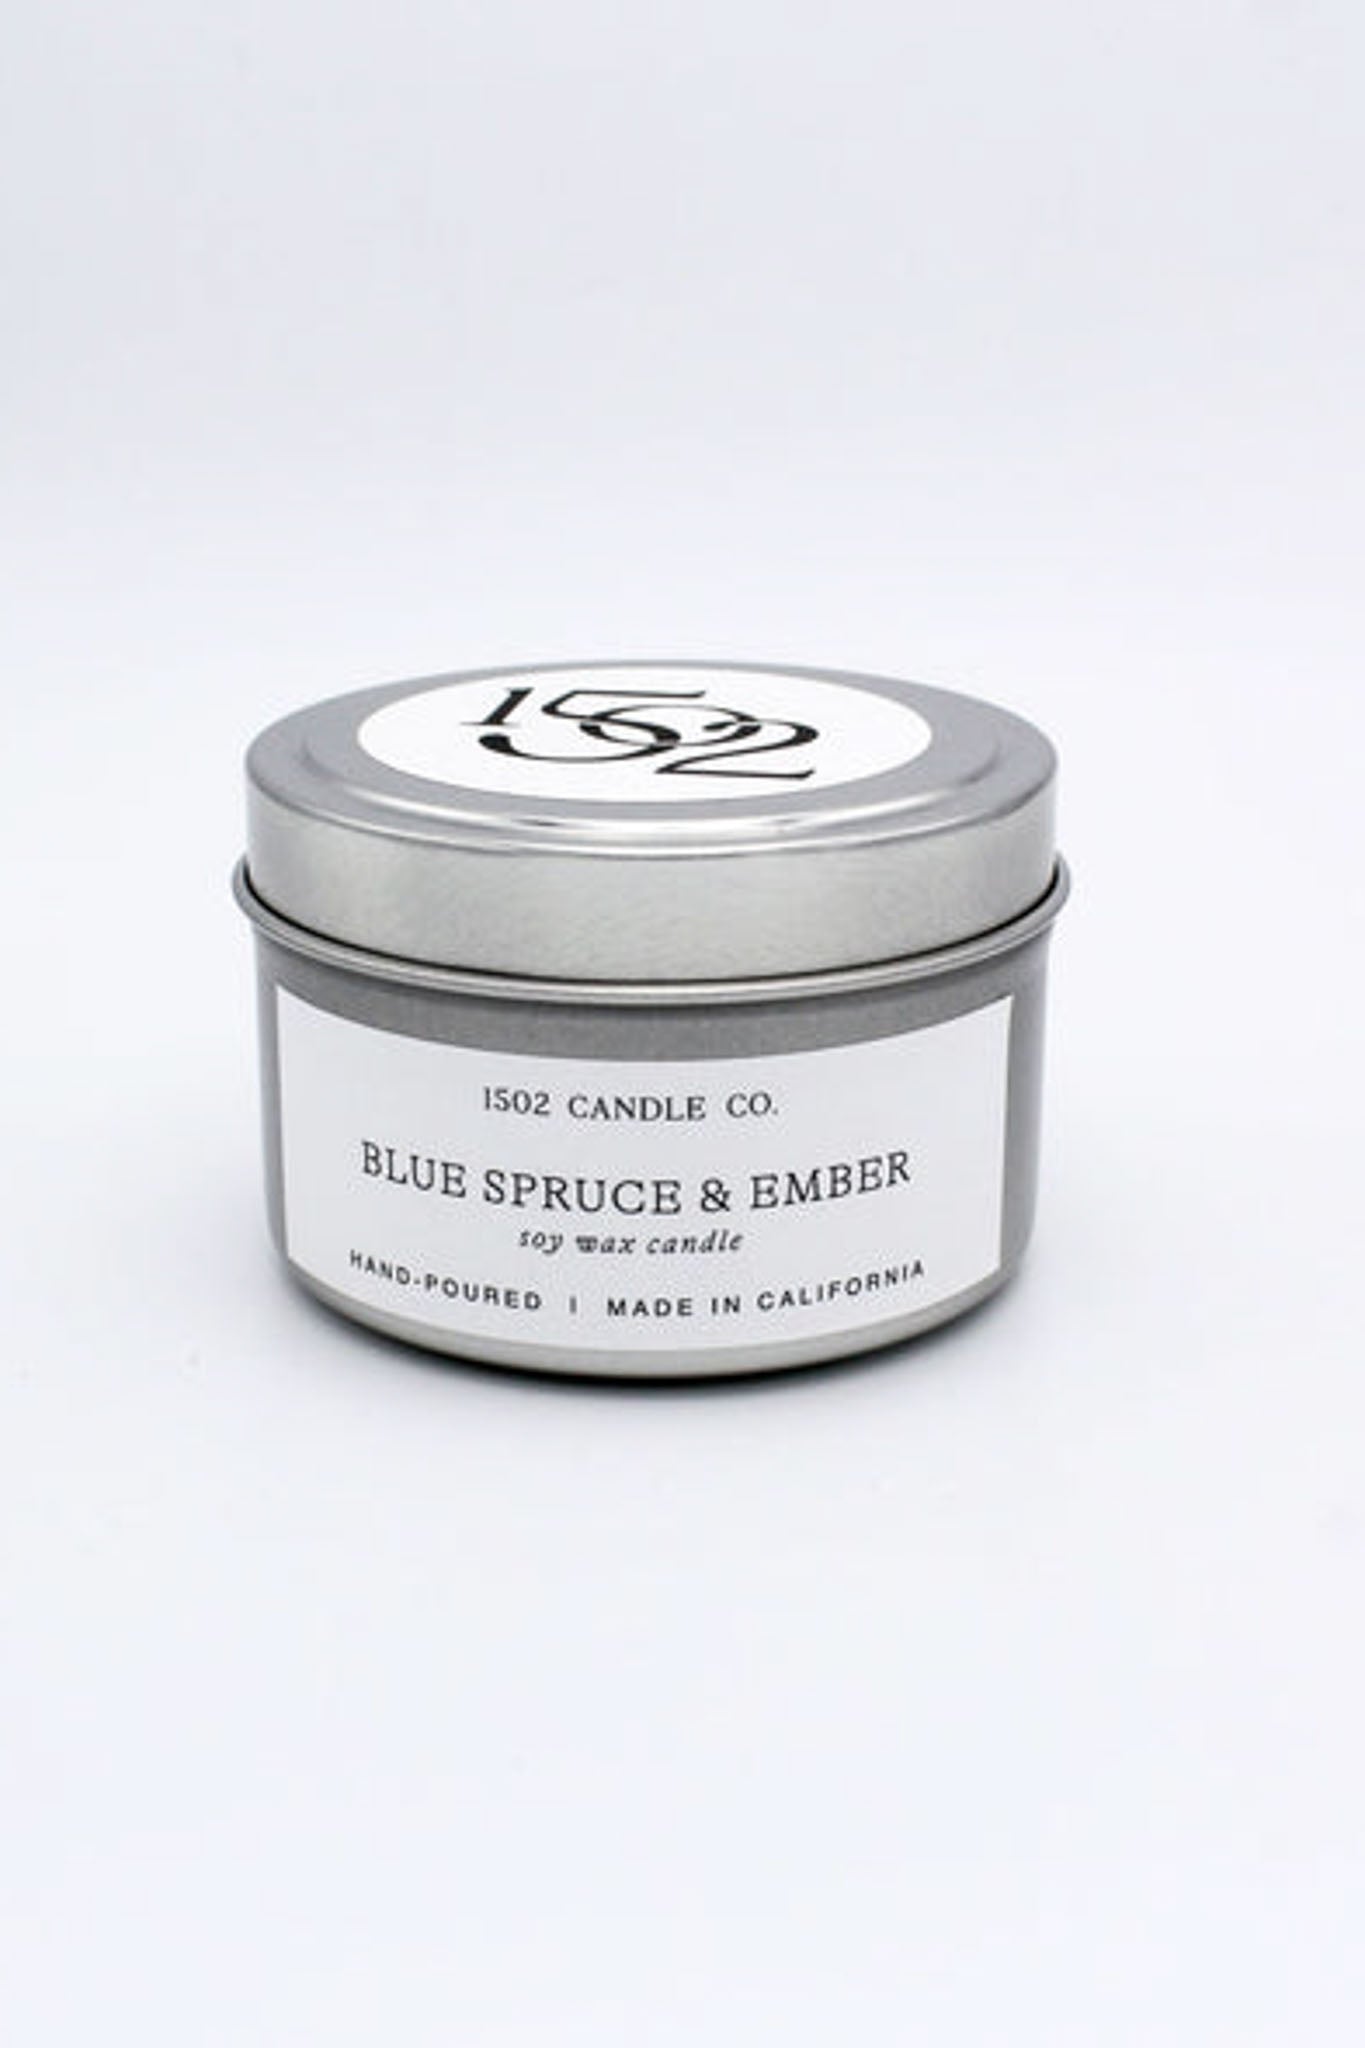 1502 Candle Co. Blue Spruce & Ember Travel Tin Candle